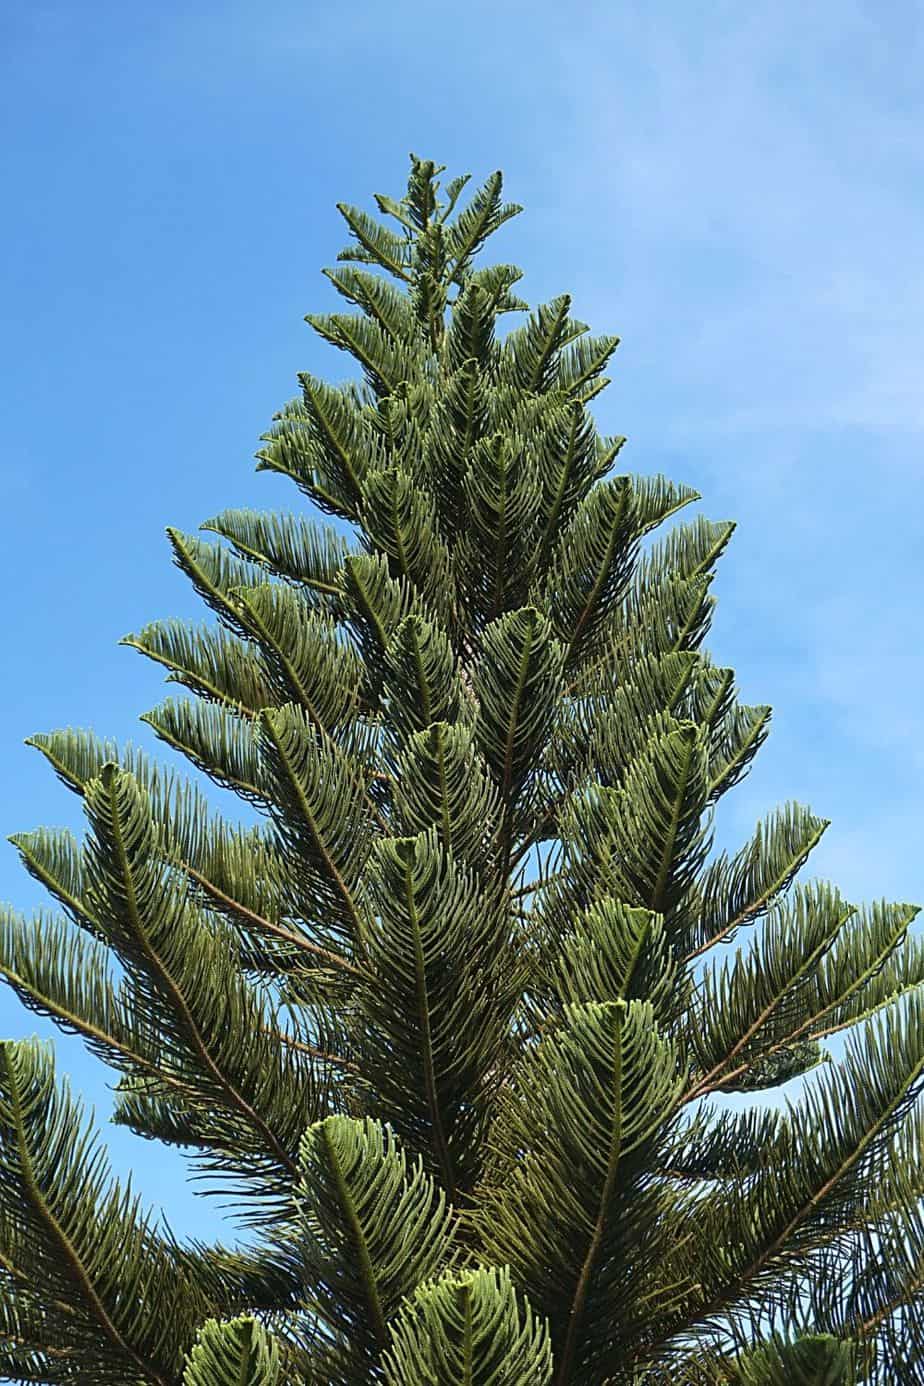 Norfolk Island Pine, though is a Holiday tree inside, is another great plant to grow for privacy